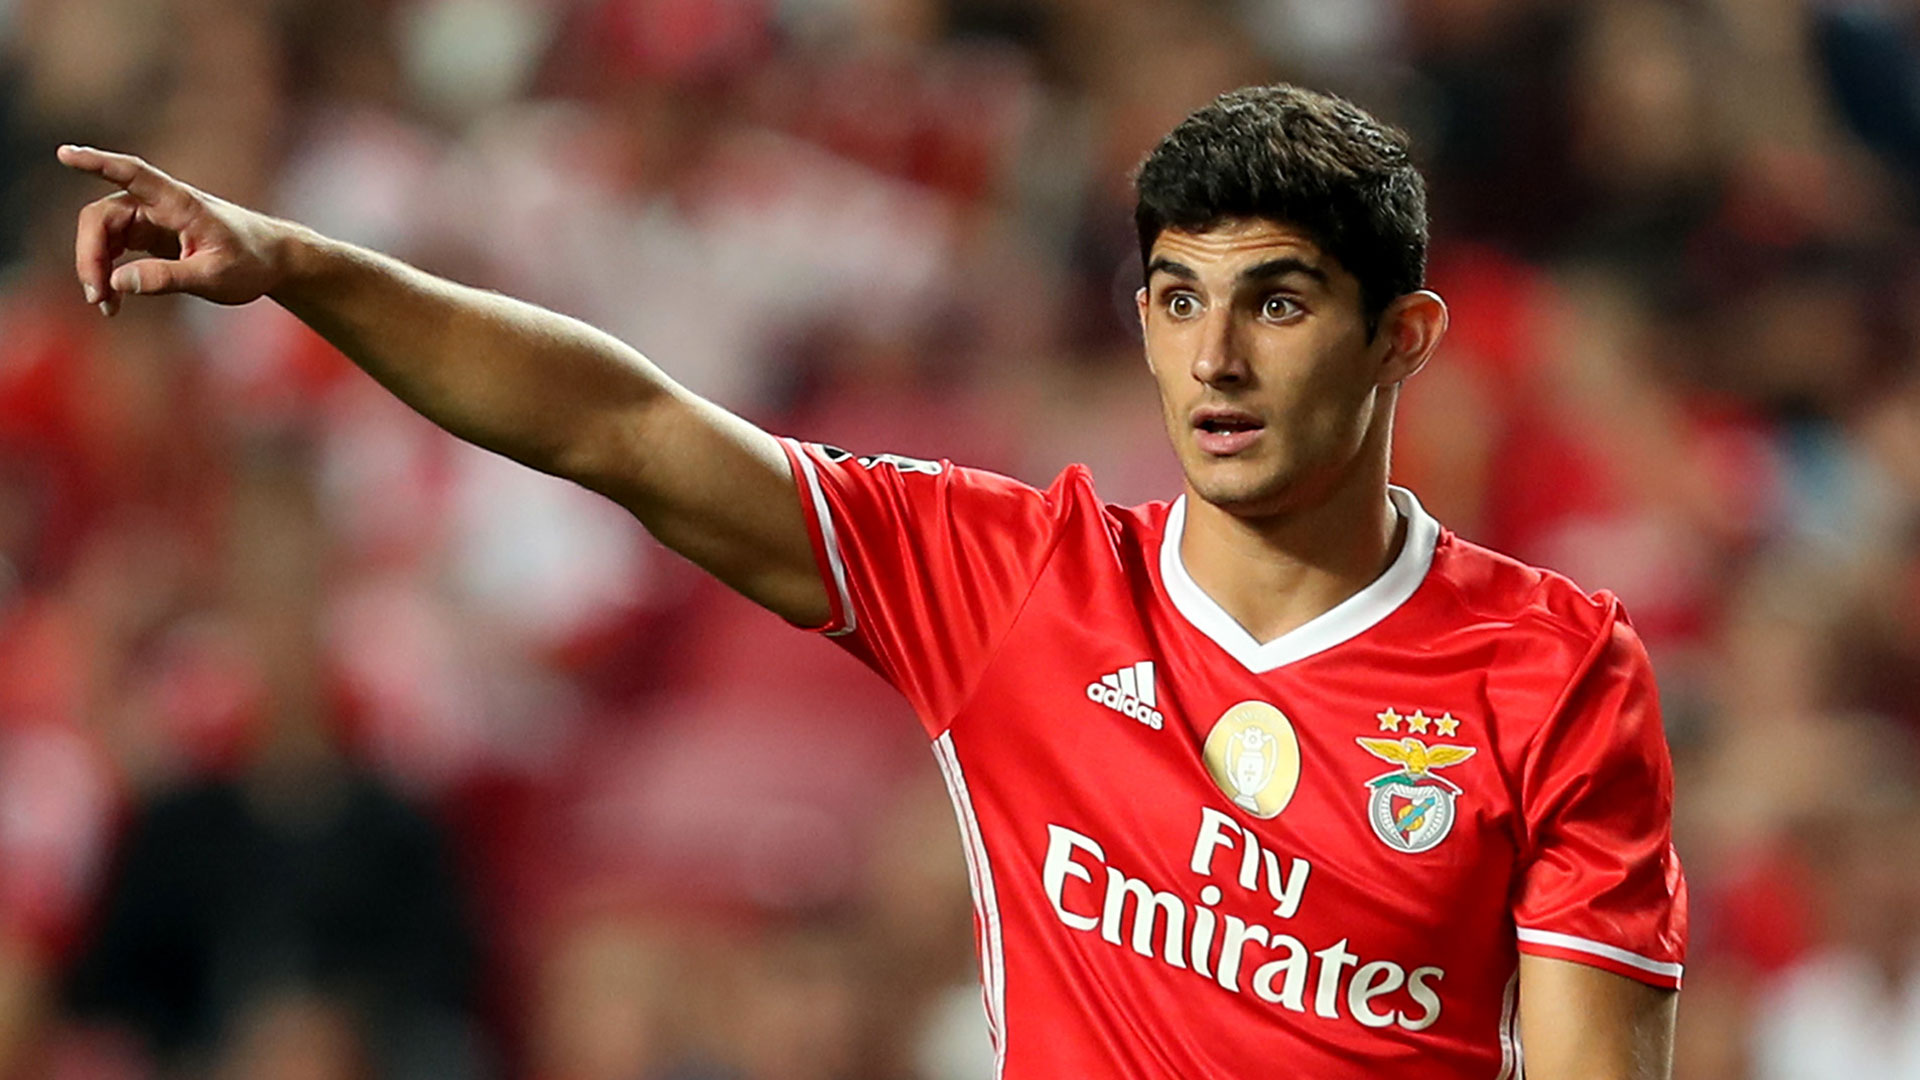 goncalo guedes - photo #5